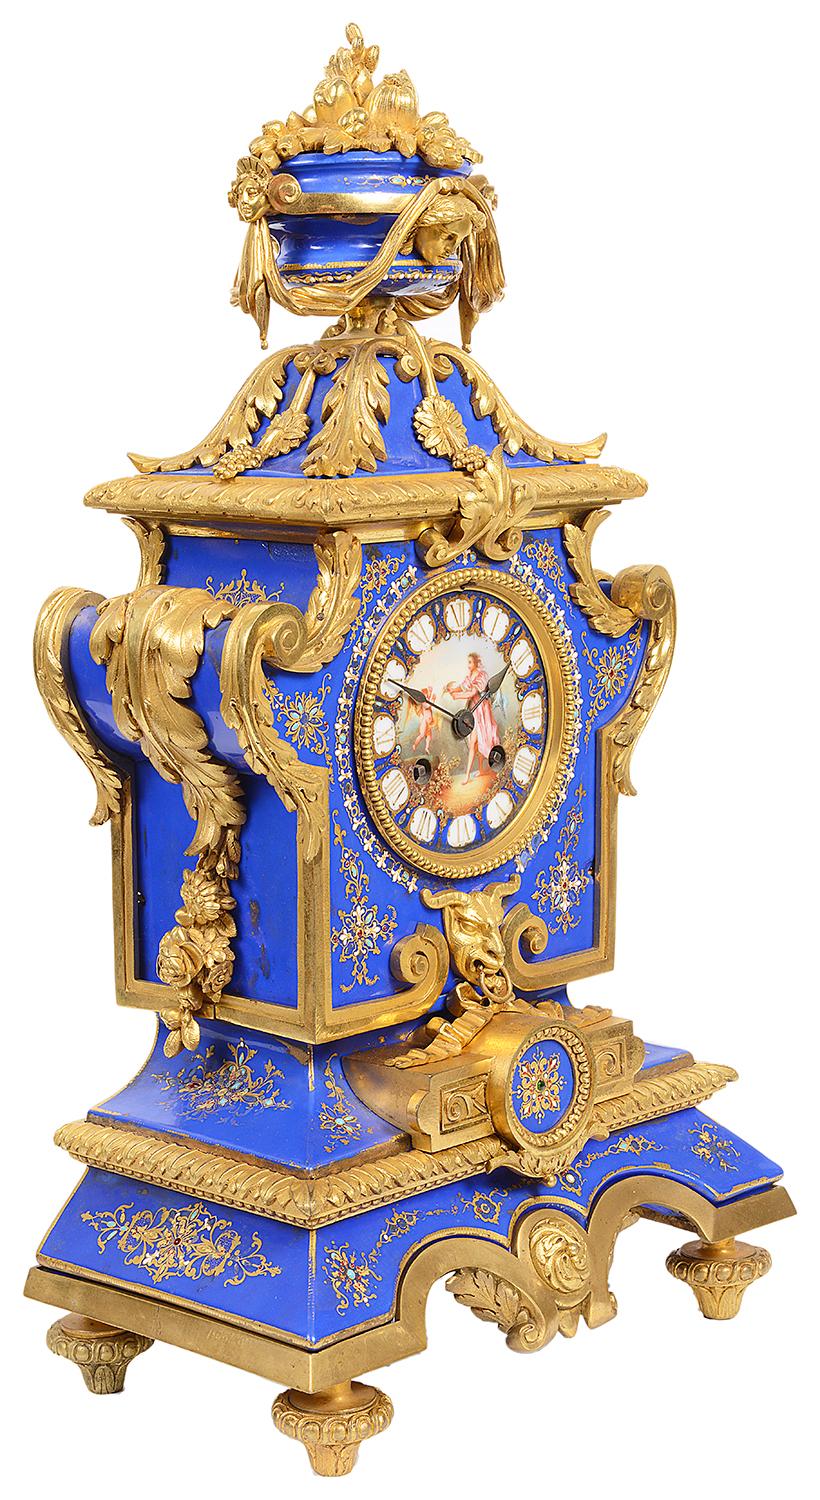 A very good quality 19th century French gilded ormolu and Sevres style porcelain mantel clock. Having a blue porcelain urn to the top with ormolu swags, scrolling gilded ormolu foliate mounts, porcelain inset panels with gilded motif decoration. The